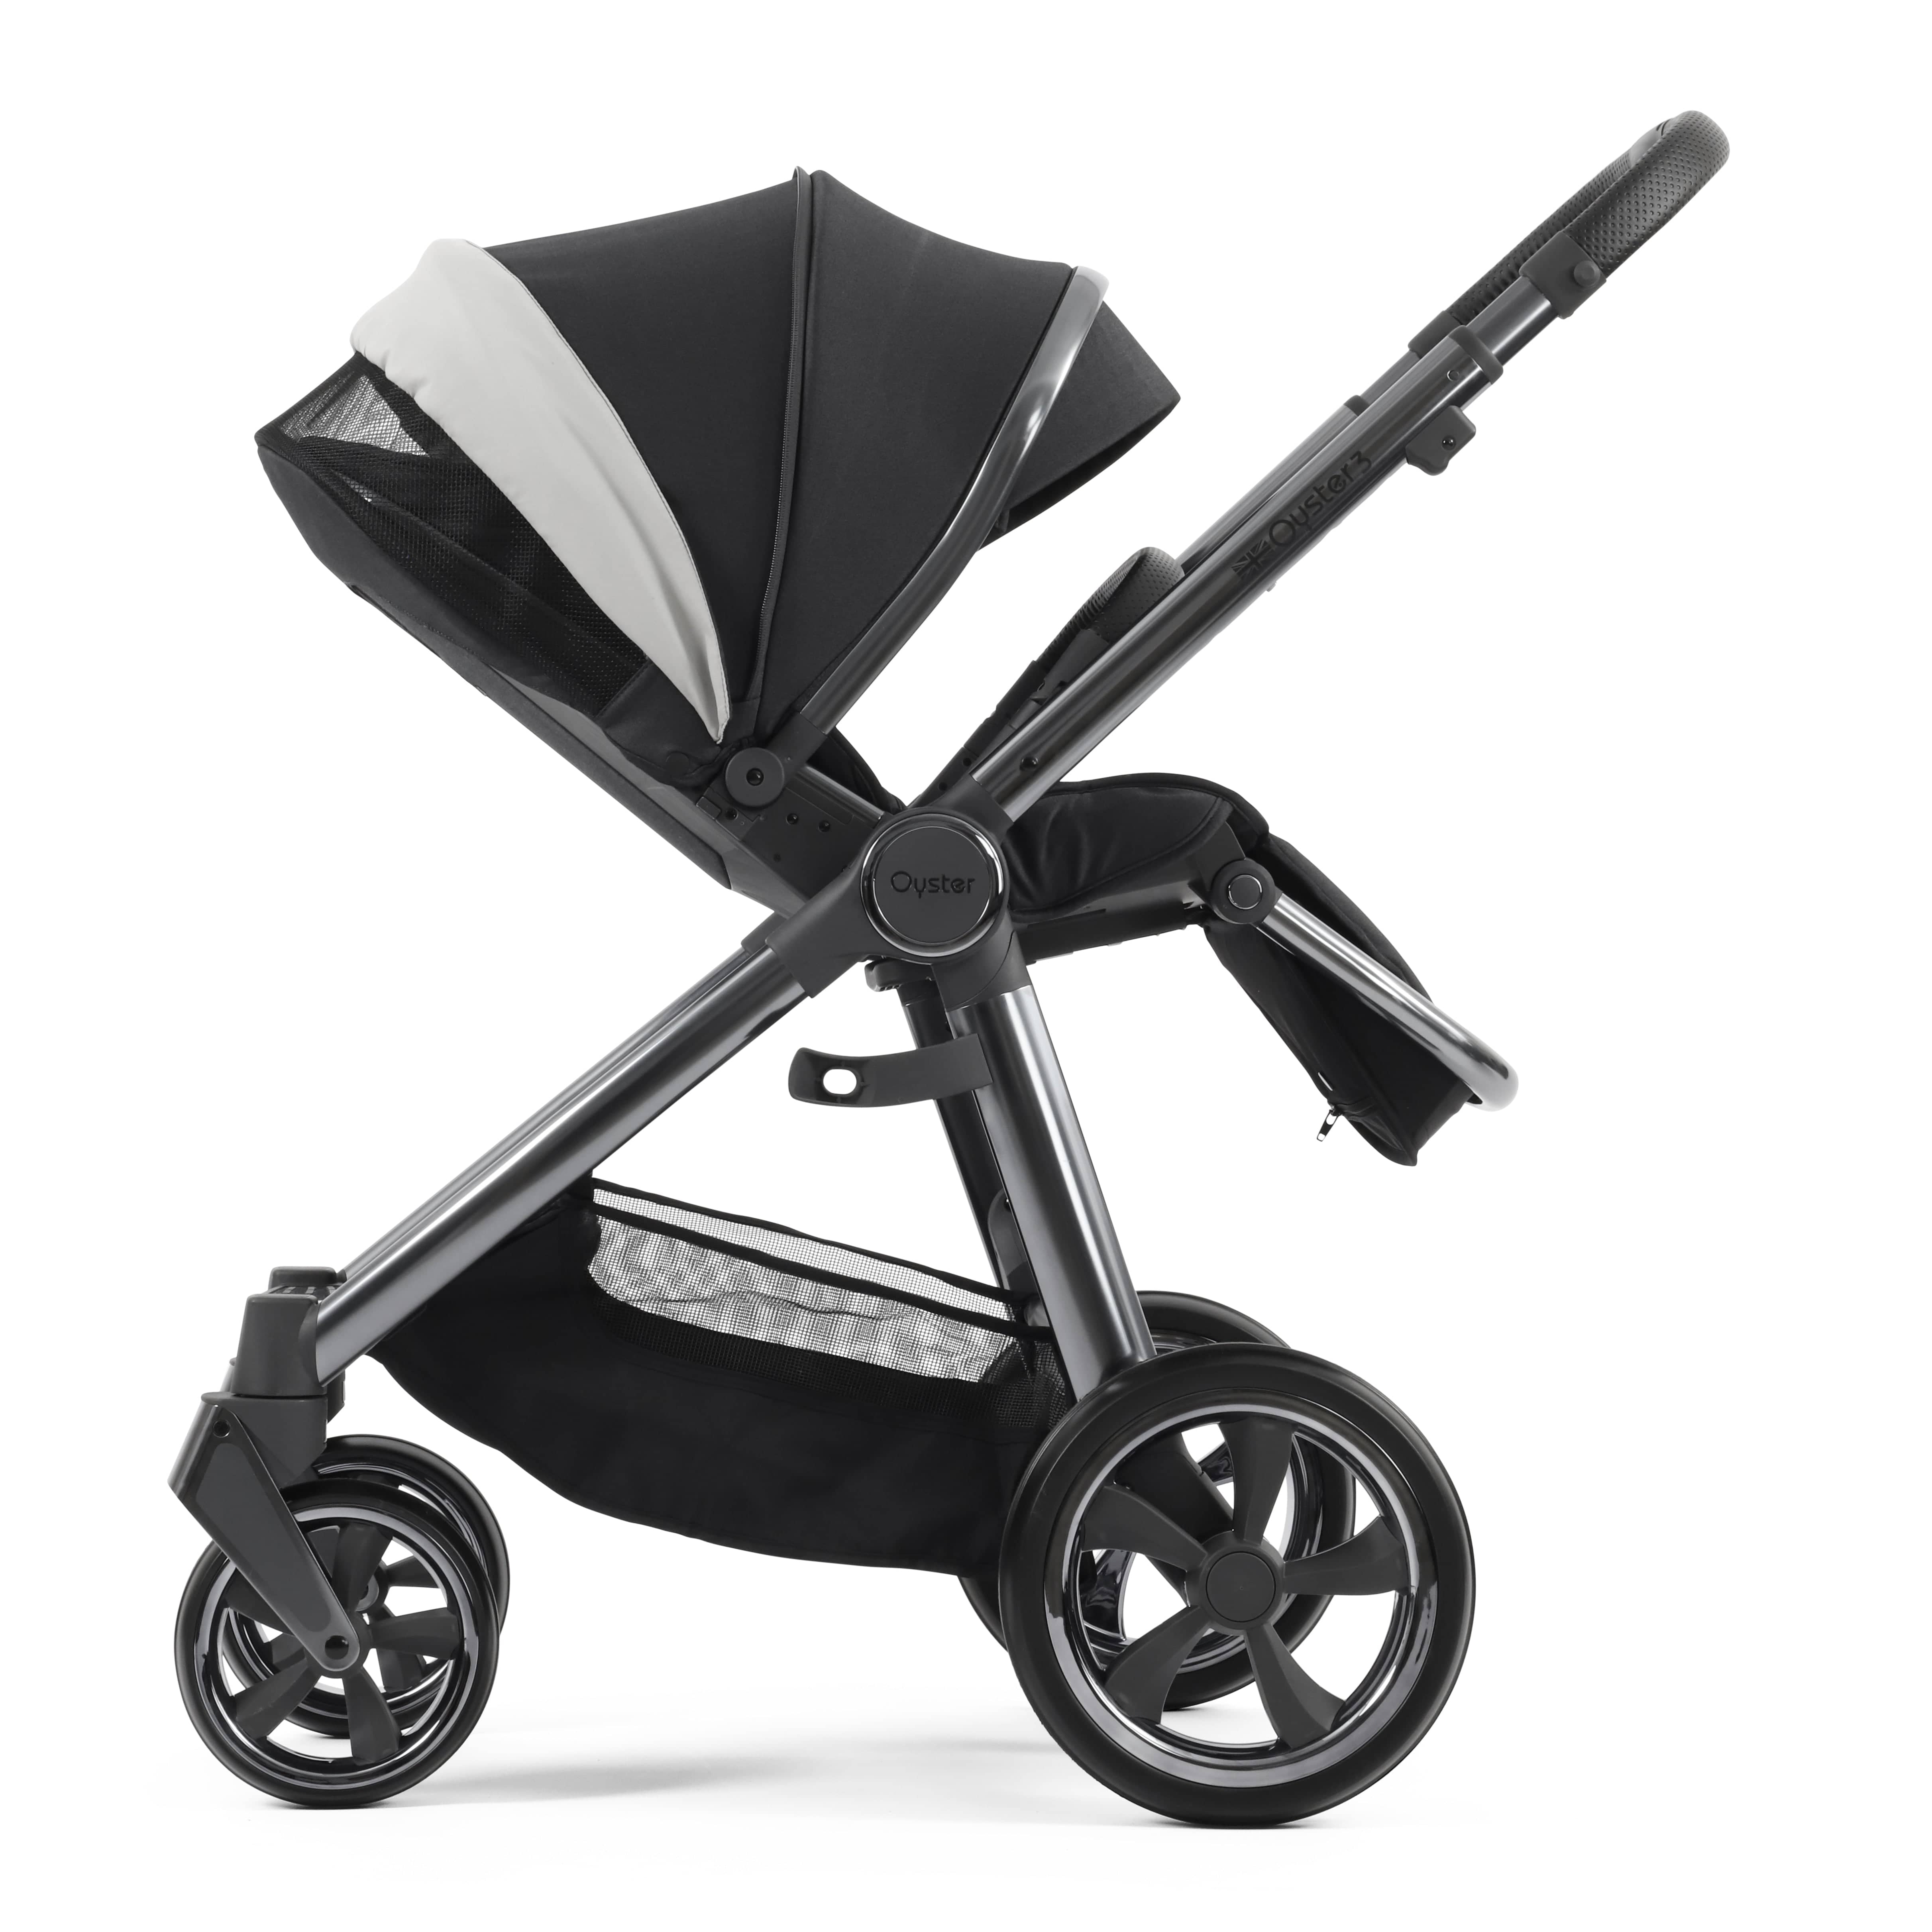 BabyStyle Oyster3 Pram & Carrycot Carbonite Baby Prams 14730-CRB 5060711567242